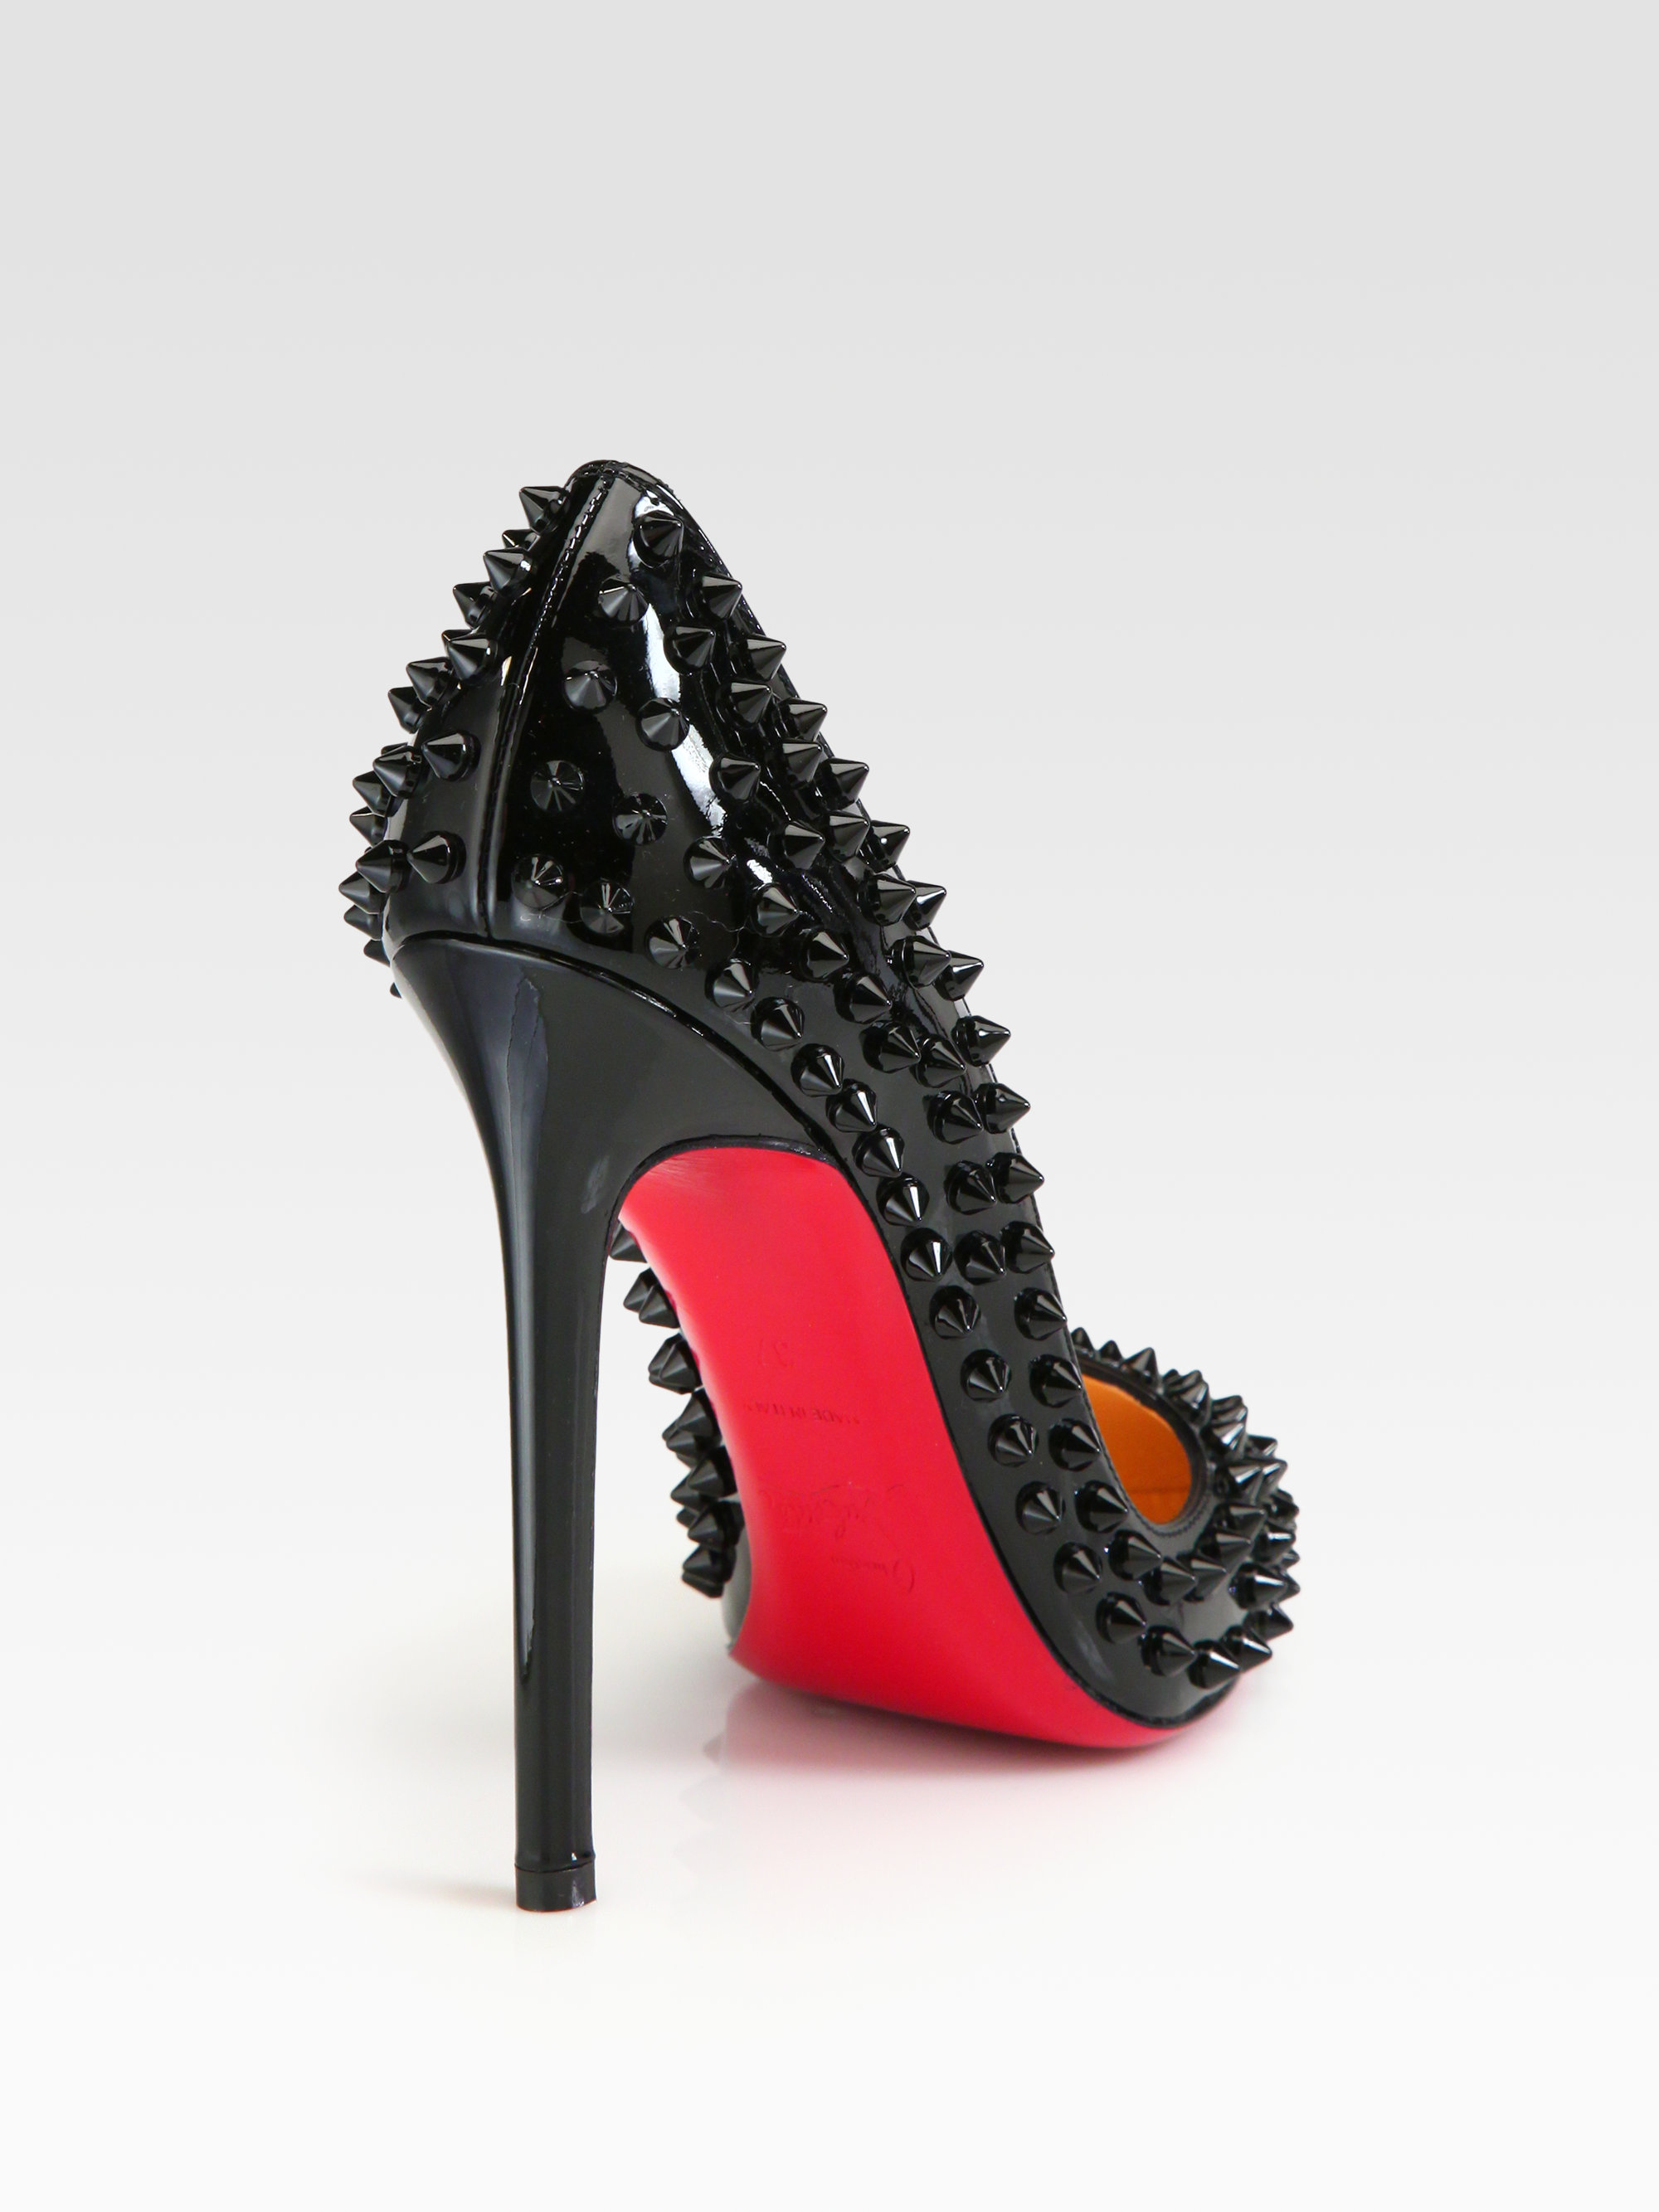 lv red bottom pumps, christian louboutin black spiked sneakers